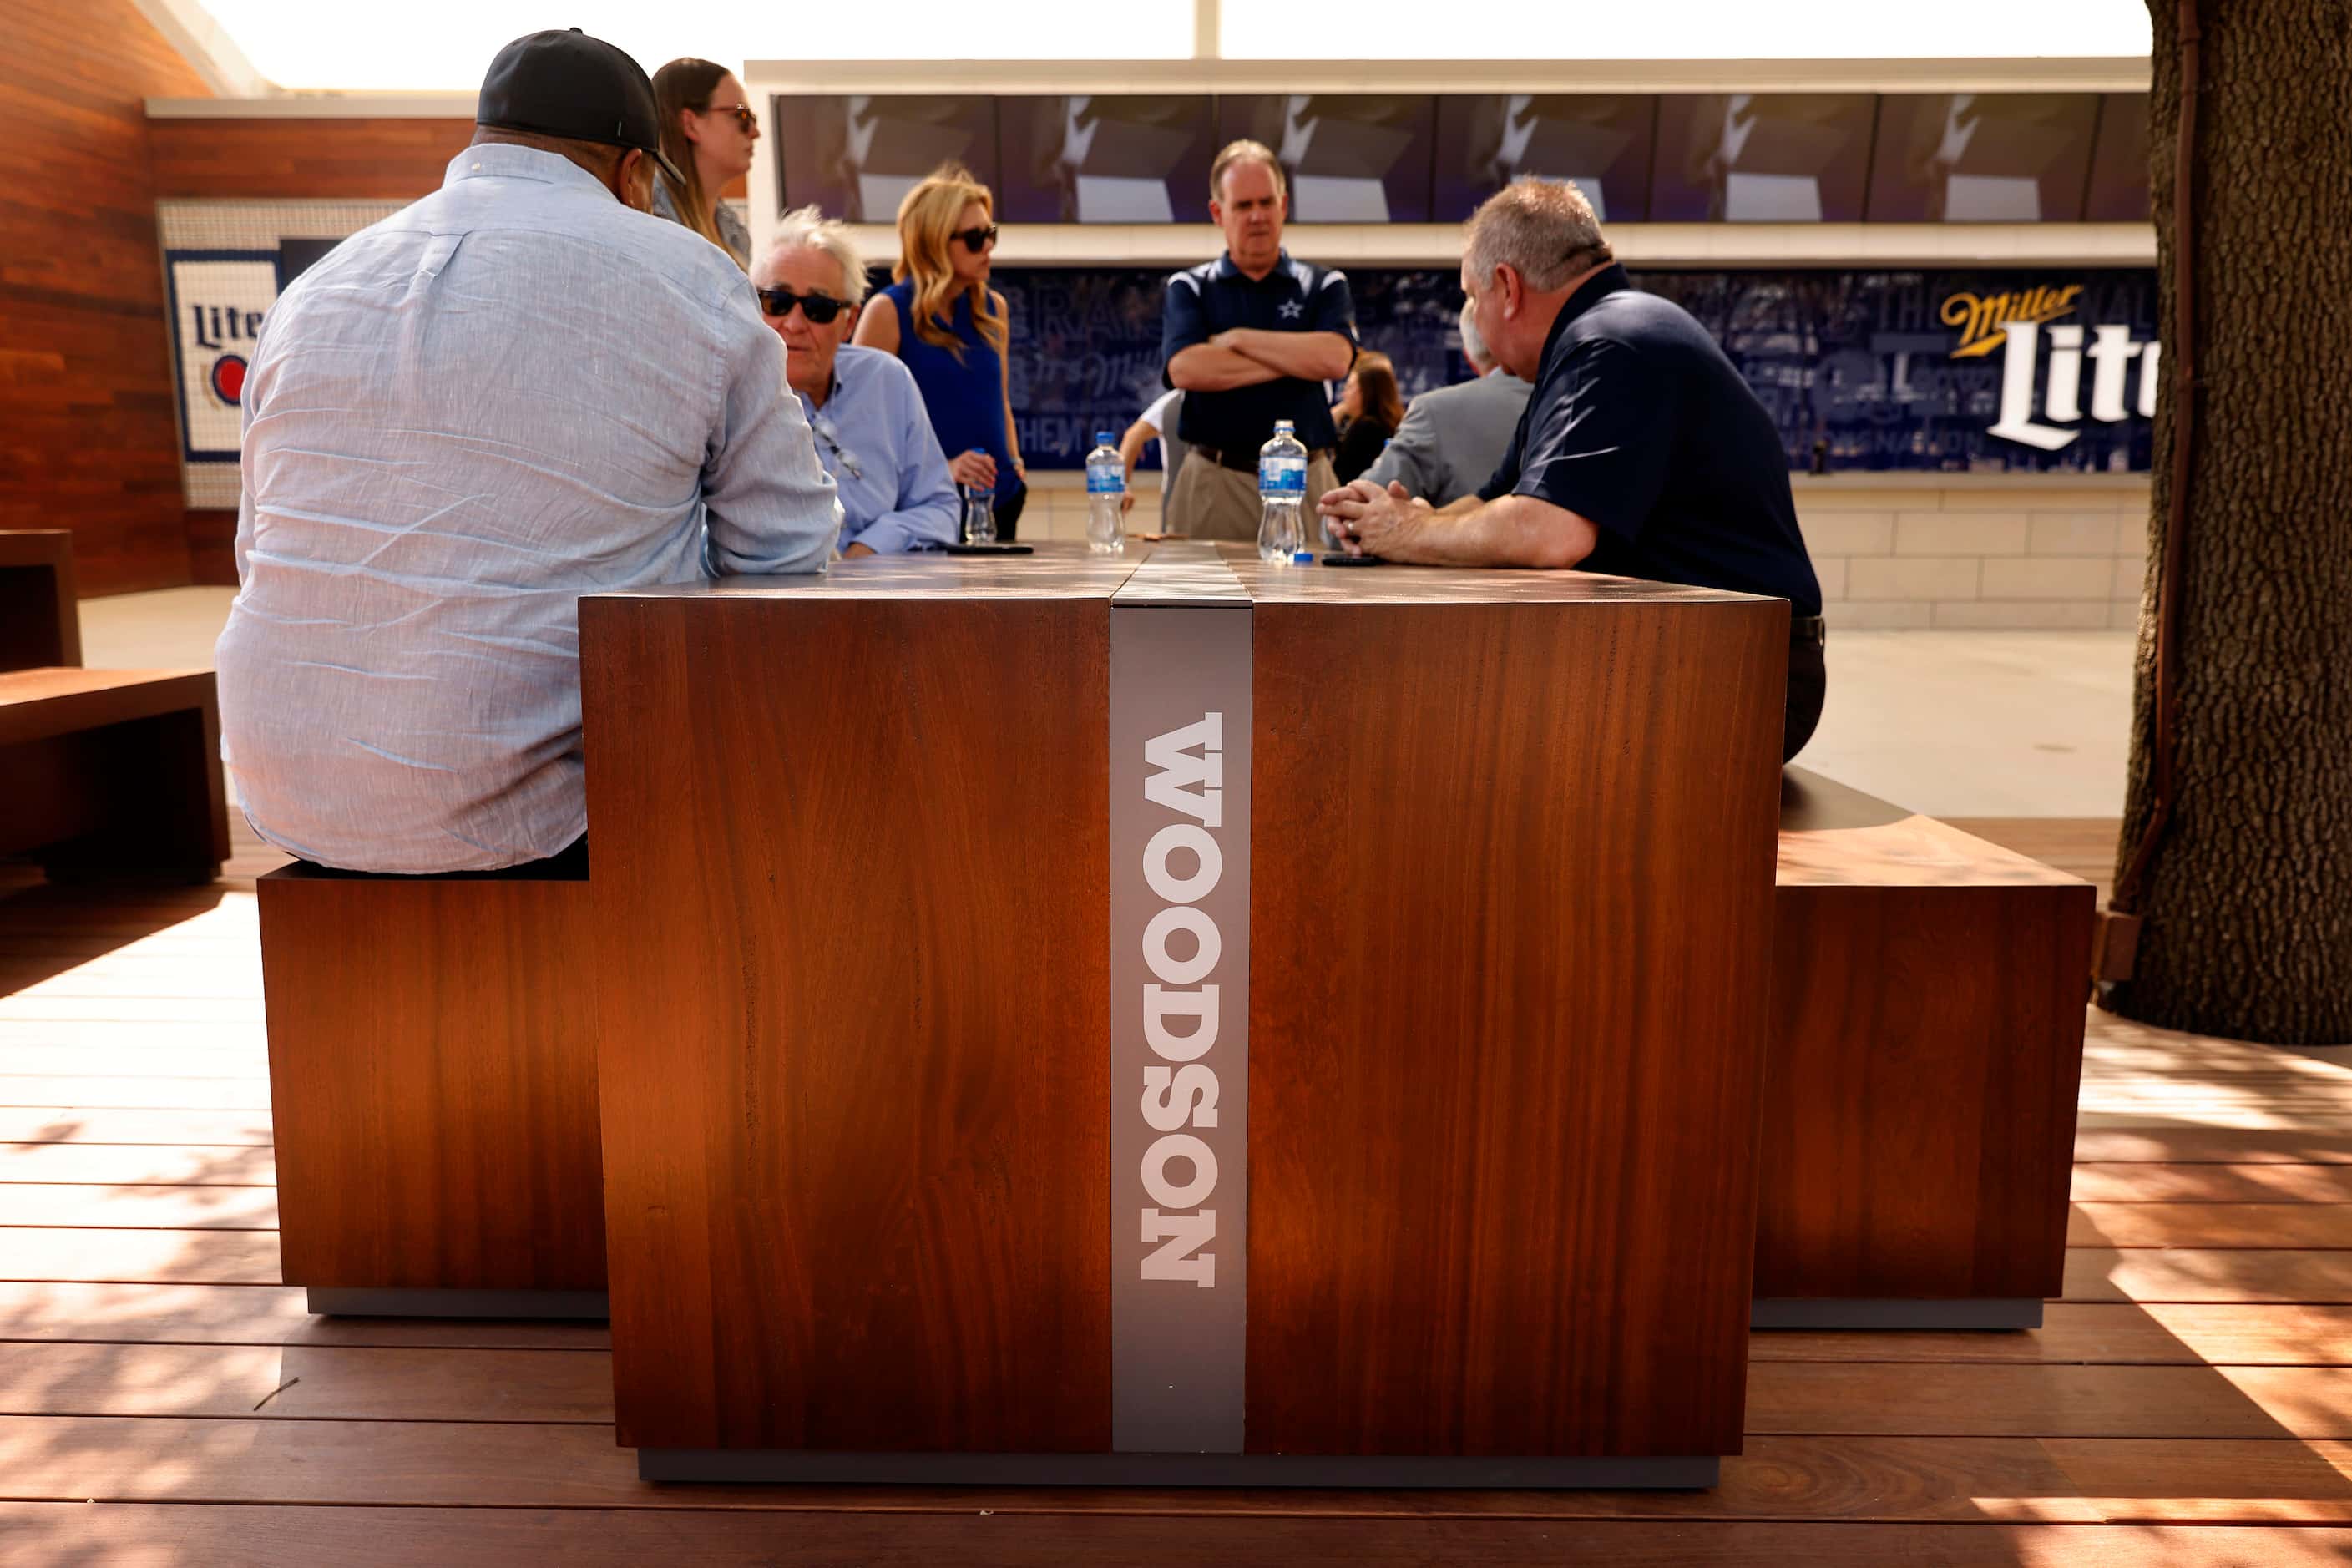 Wood tables are named for the Dallas Cowboys Ring of Honor members, including Darren...